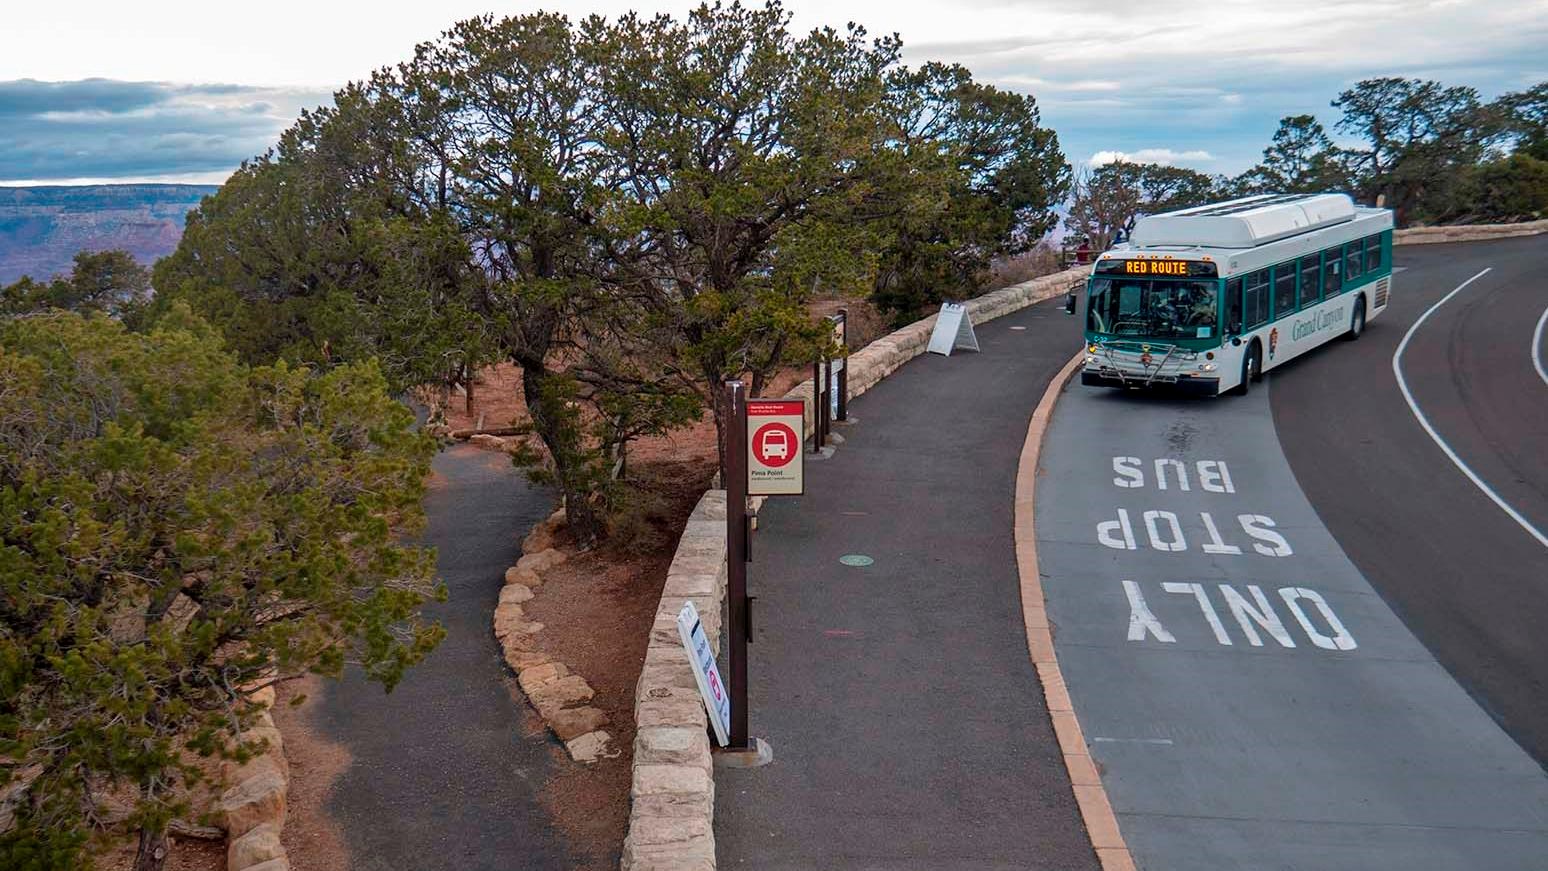 a green and white bus pulling into a bus stop. a large tree is between the bus stop and a paved path